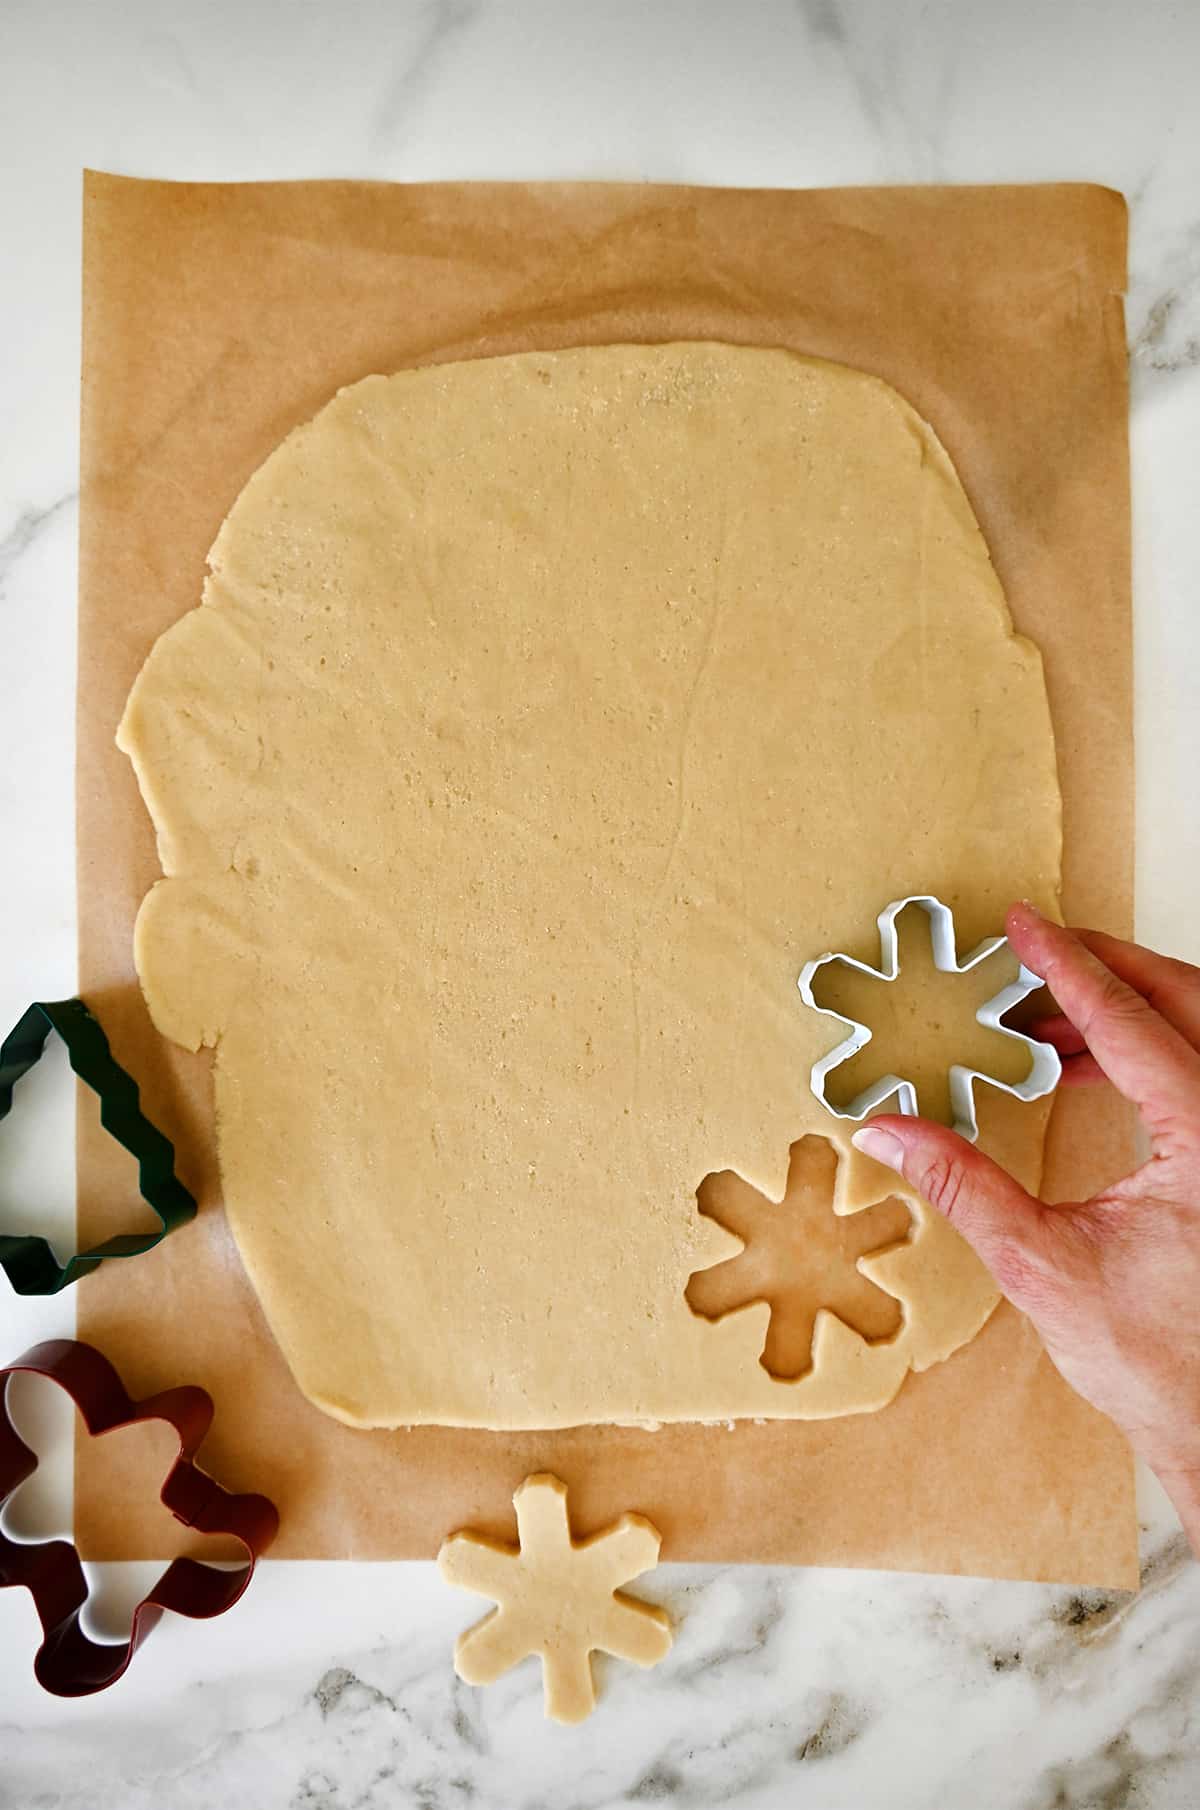 Rolled out dough on a sheet of parchment paper being cut into snowflake shapes with a gingerbread man and Christmas tree cookie cutter next to it.